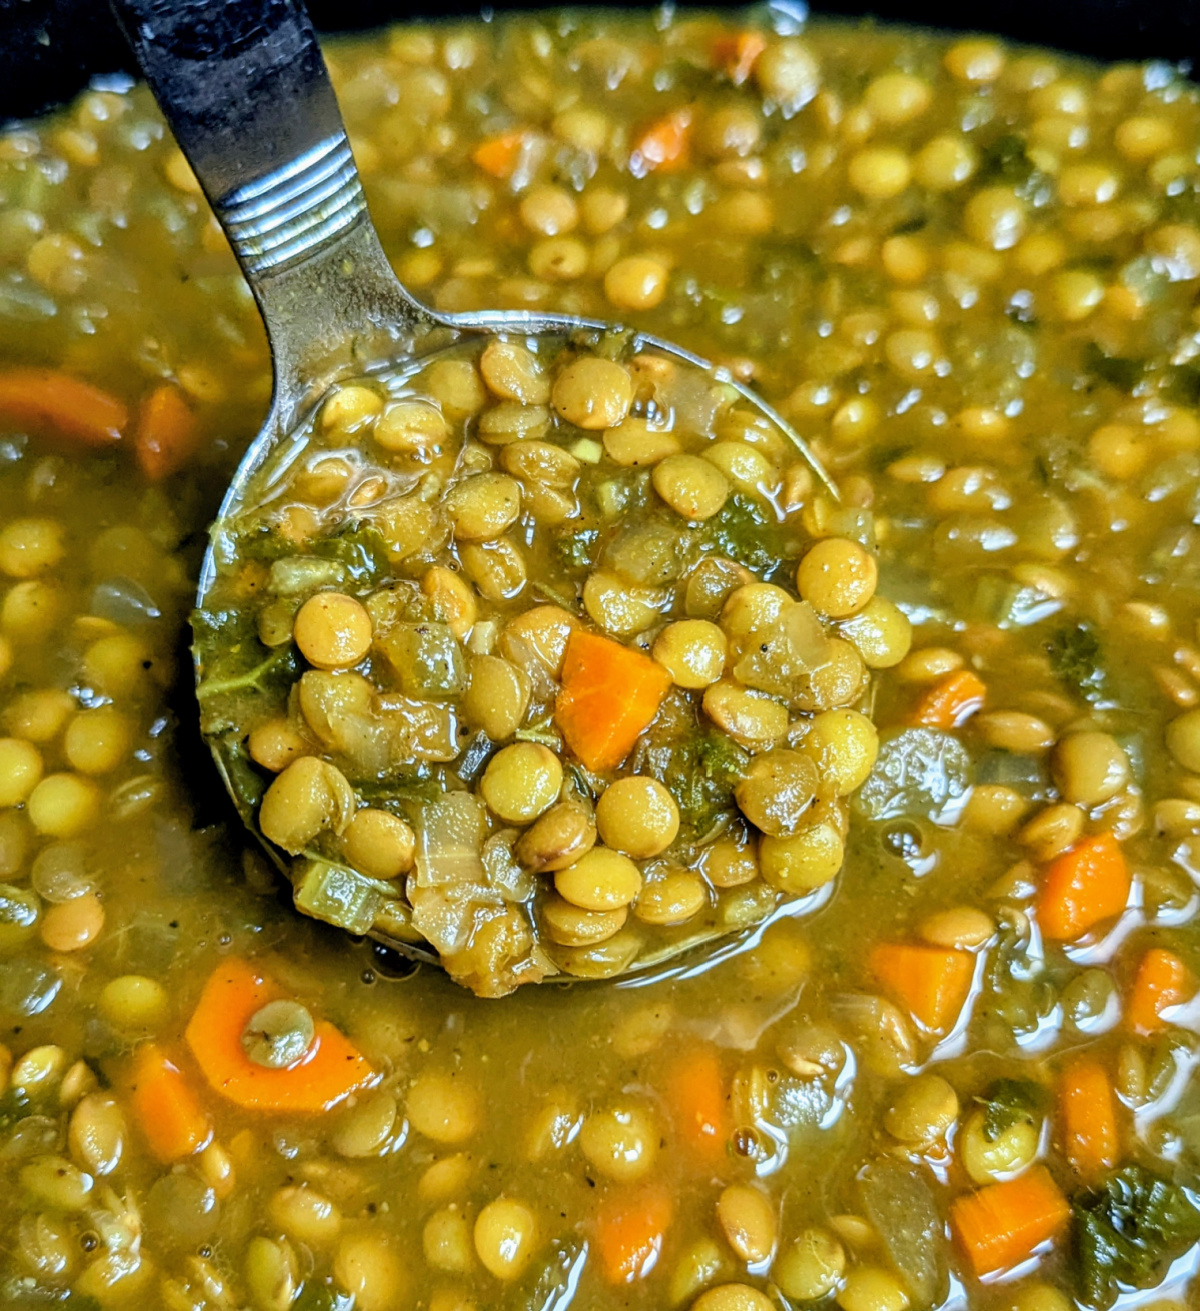 A ladle full of Slow Cooker Curried Lentil Soup